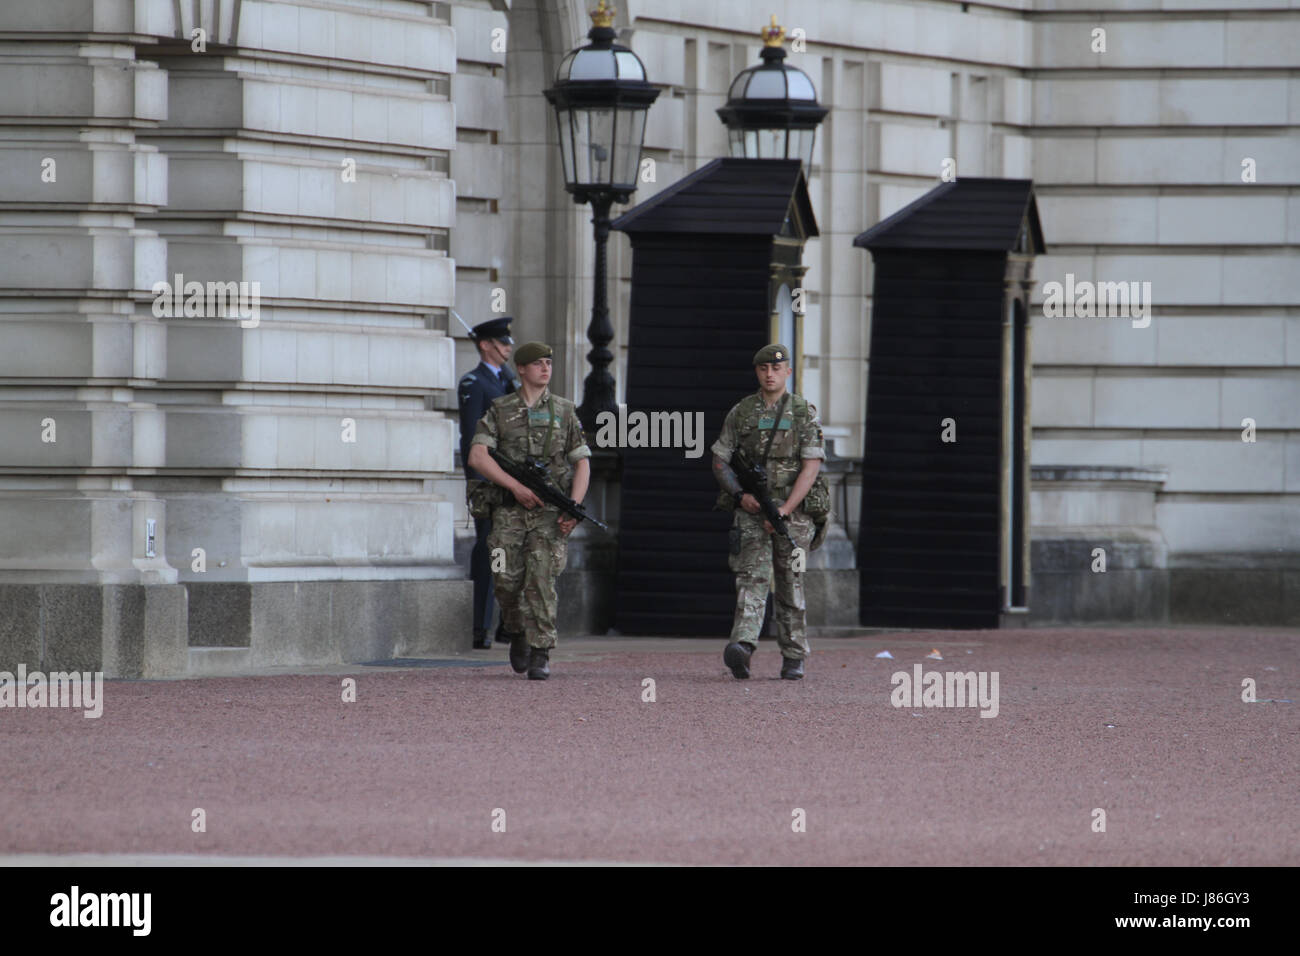 London, UK. 27th May, 2017. Soldiers carrying rifles march along Buckingham Palace front yard after threat level was raised to critical, following the May 22nd Manchester Arena attack. About 1,000 armed military personnel were deployed to guarding national landmarks across the country. Credit: David Mbiyu/Alamy Live News Stock Photo